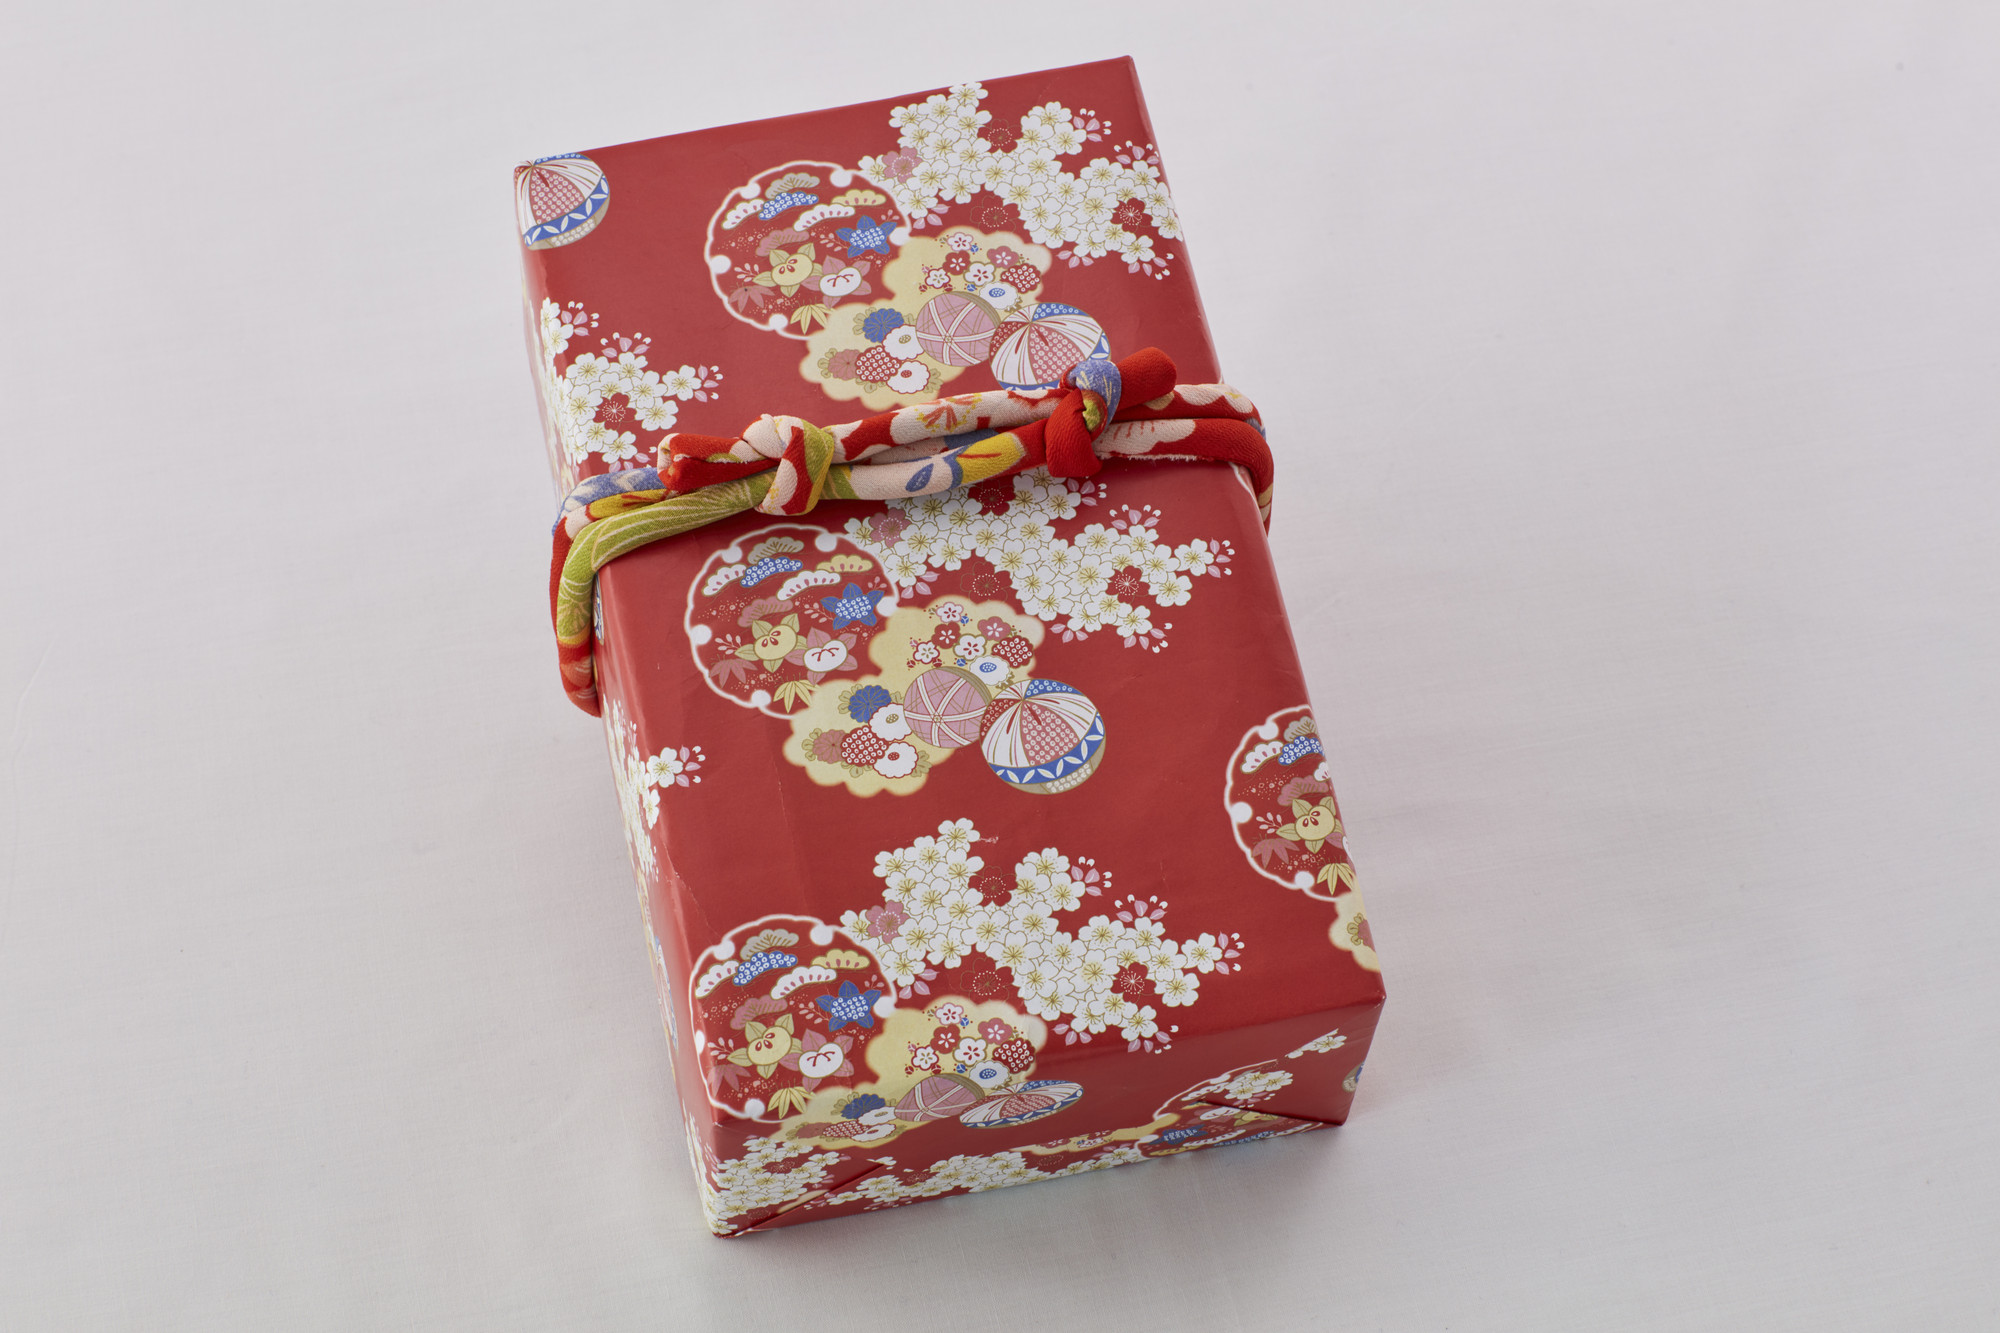 Japanese Washi Gift Wrapping Papers - 12 Sheets (9780804852333)